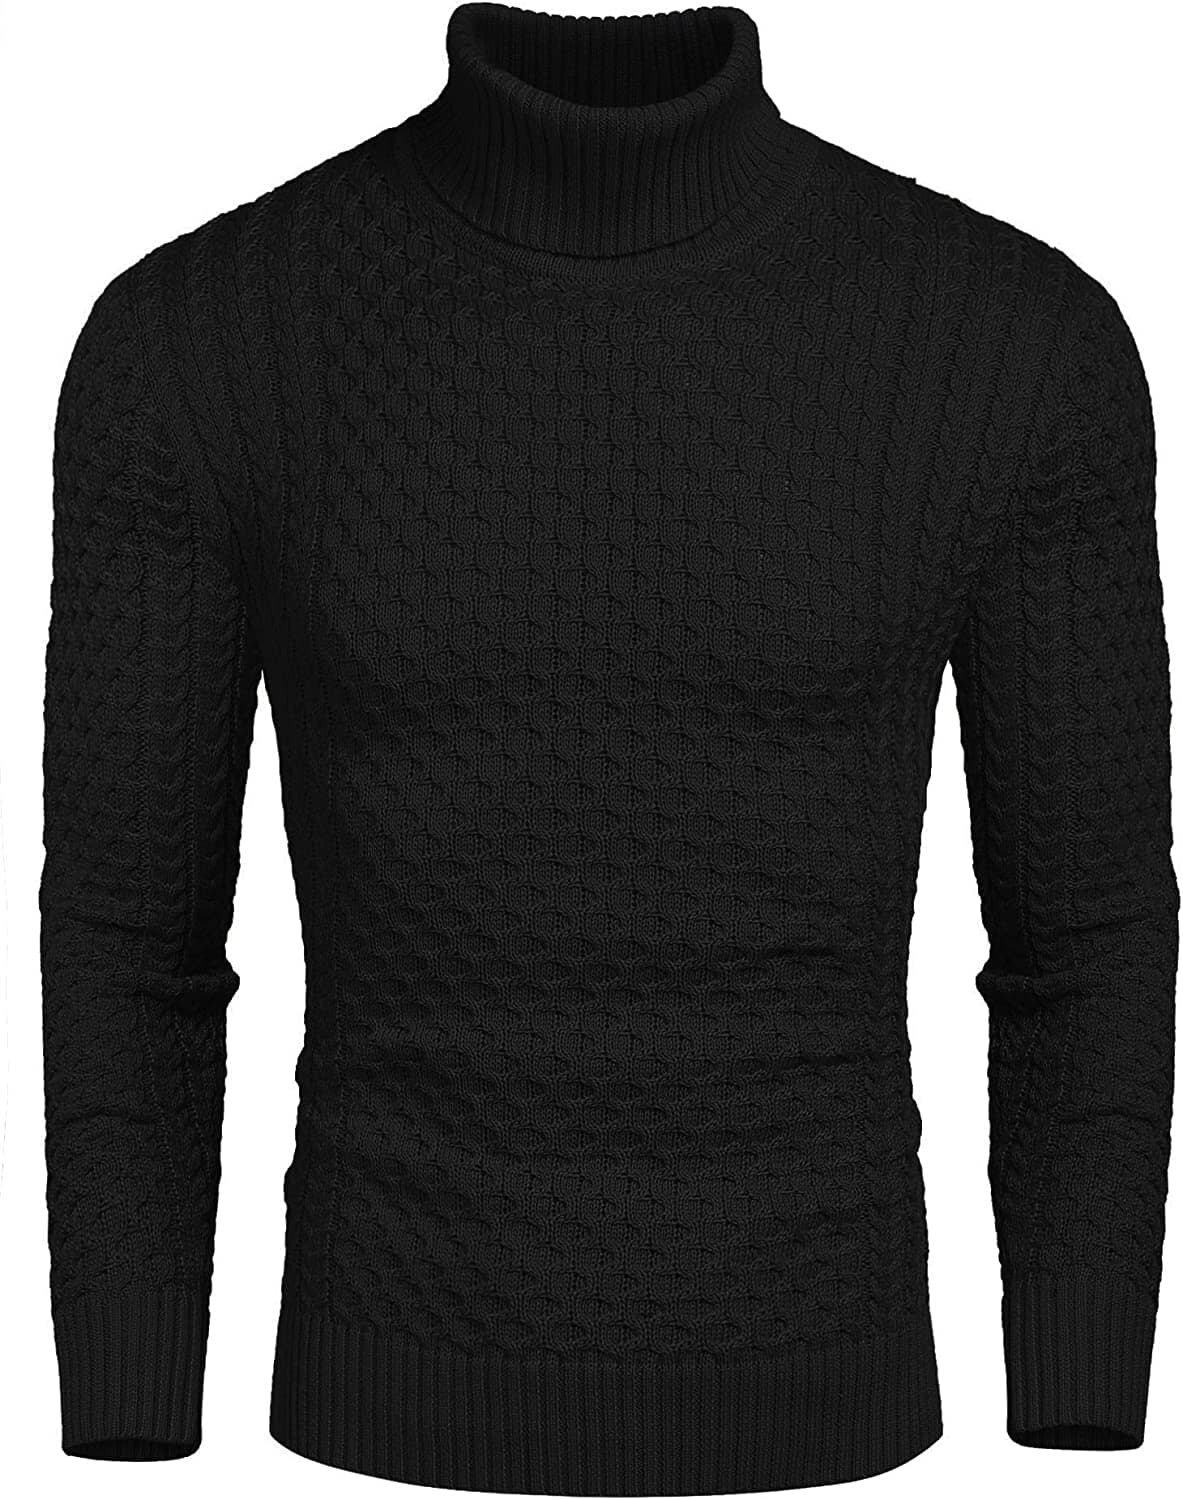 Slim Fit Turtleneck Twisted Sweater (US Only) Sweaters Coofandy's Black XS 